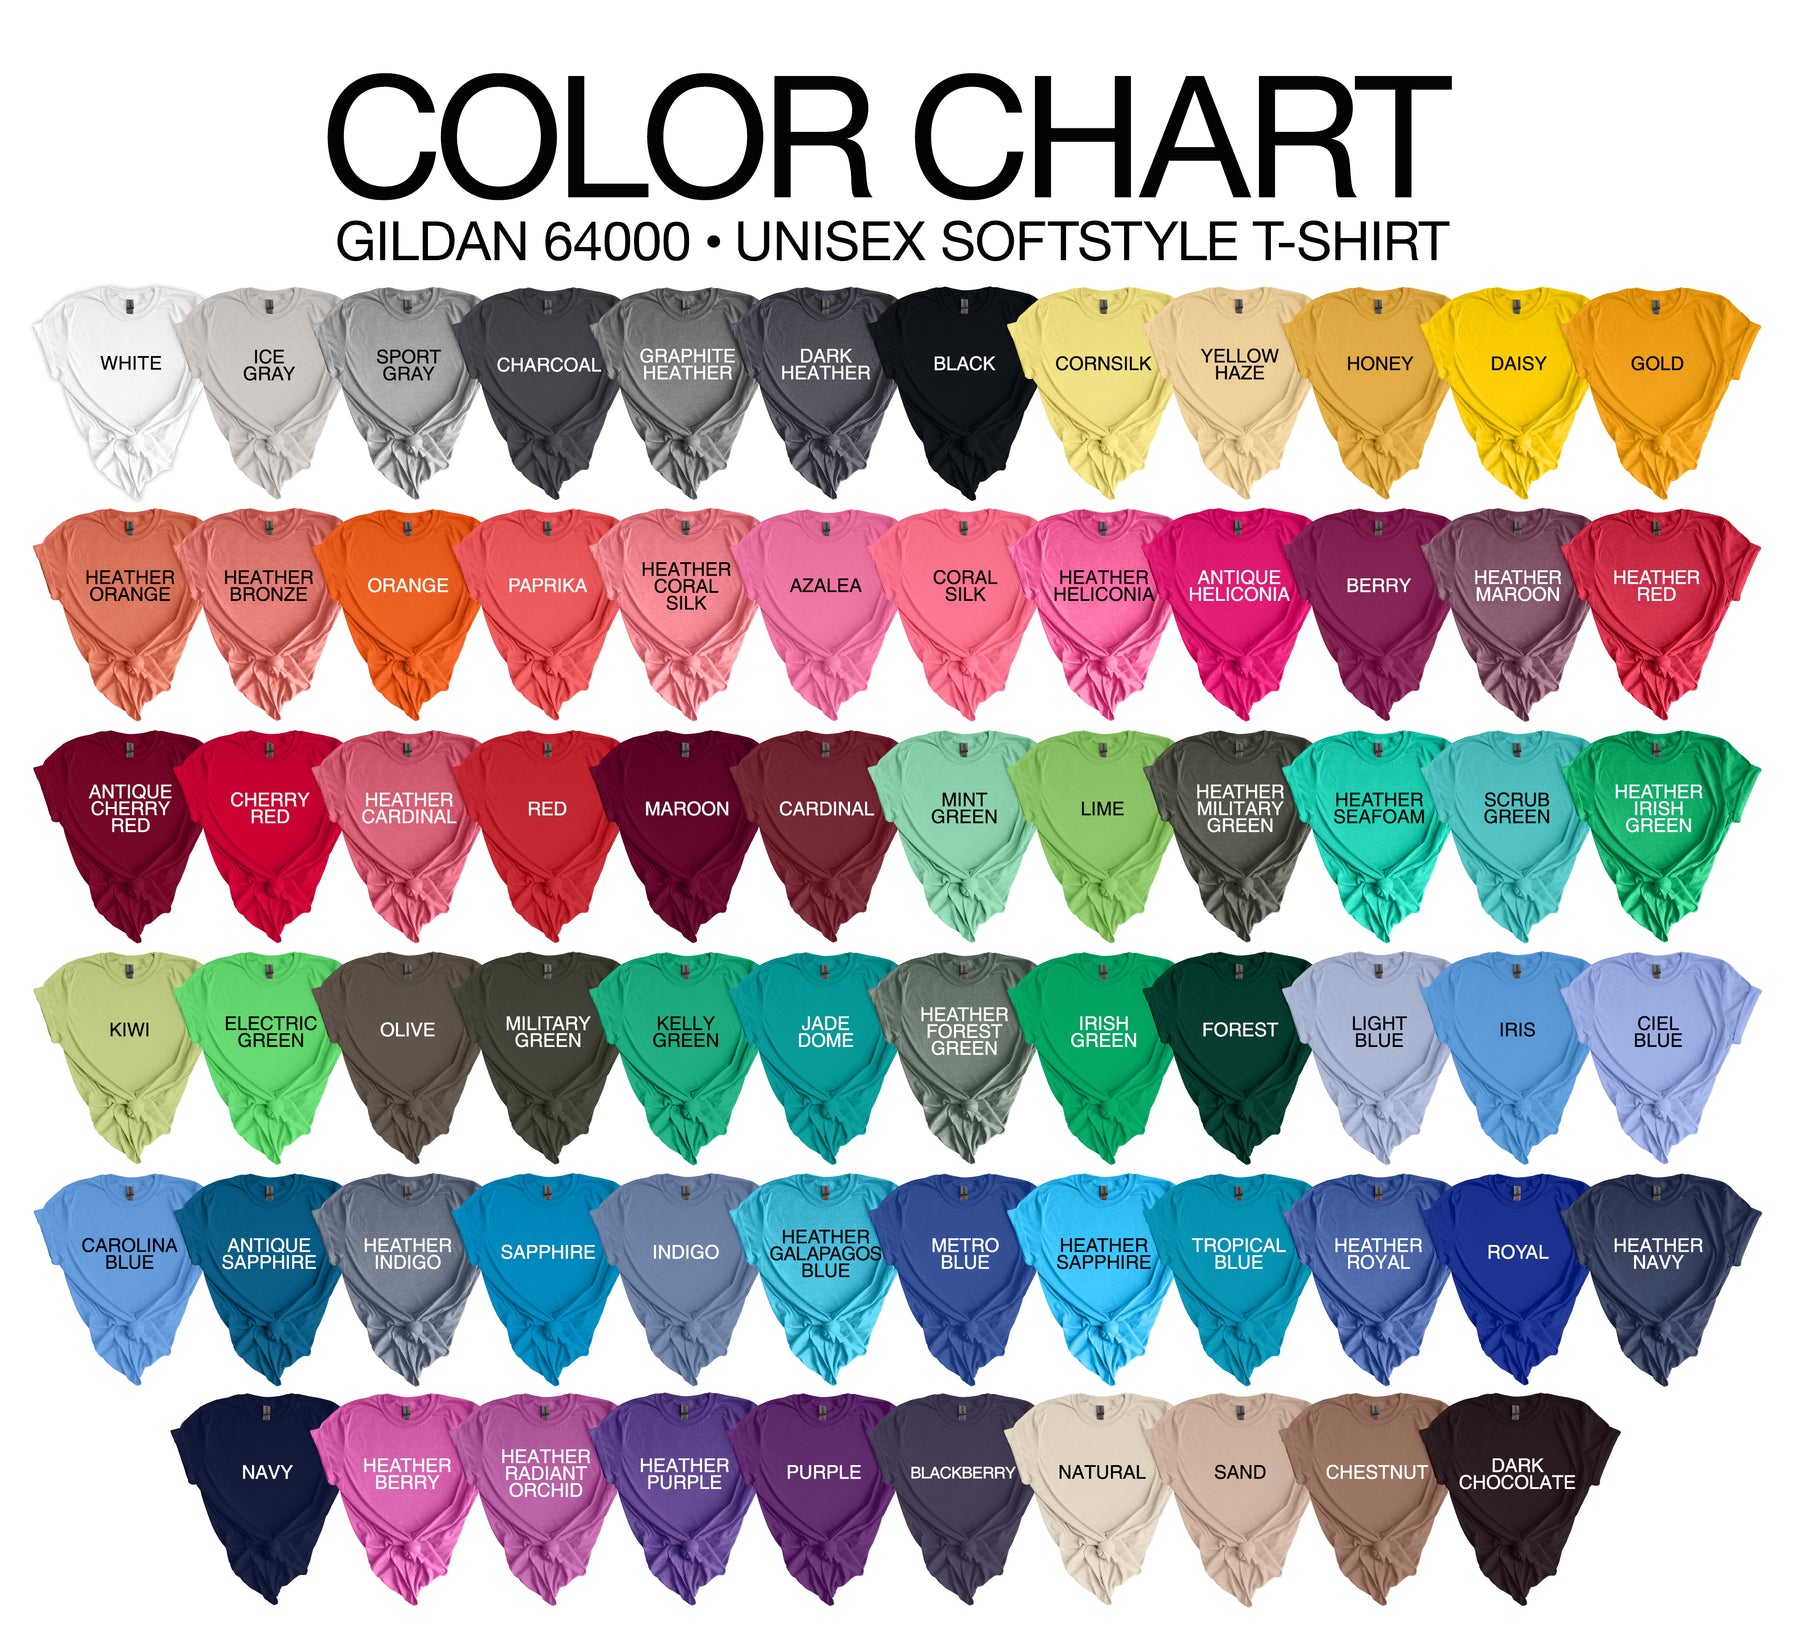 I Got So Much Procrastinating Done Today -TShirt  *YOU PICK COLOR*